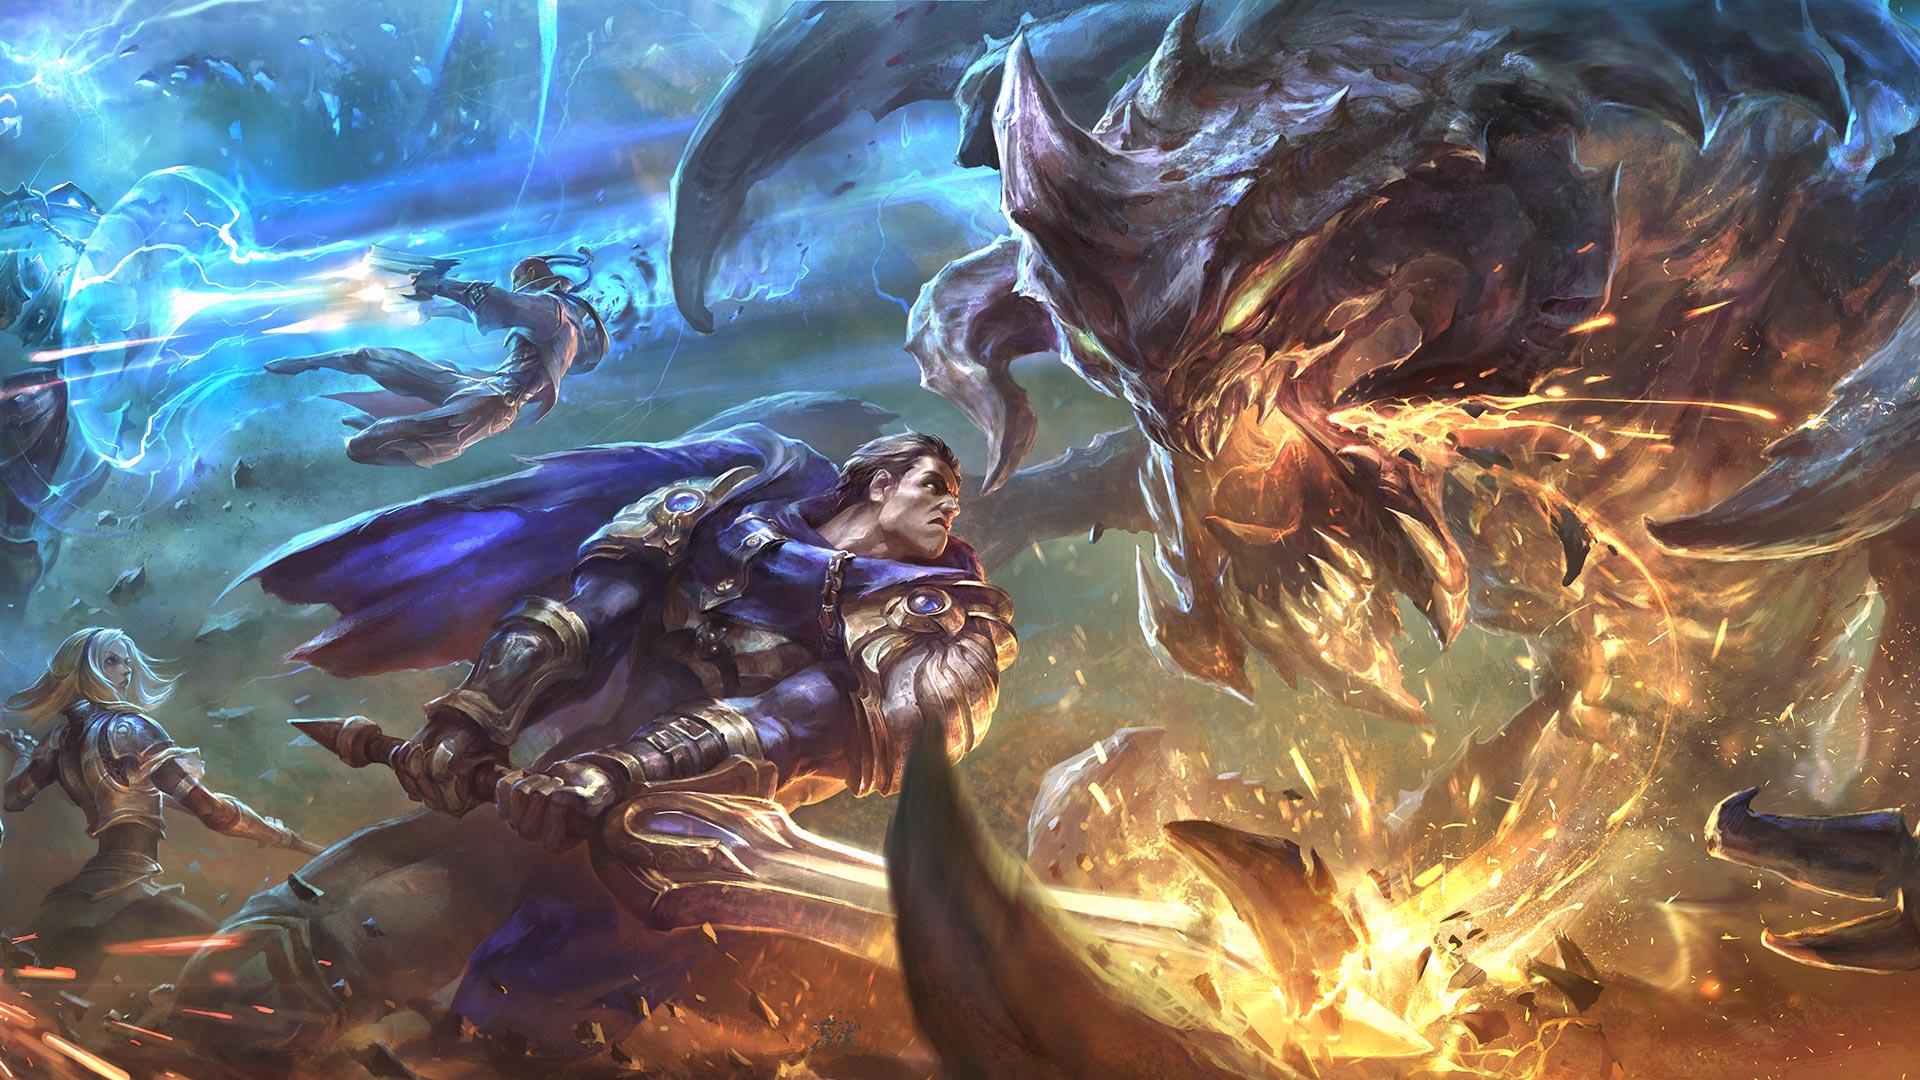 End of TFT set 5.5. Do you know what the top TFT tier comps are?